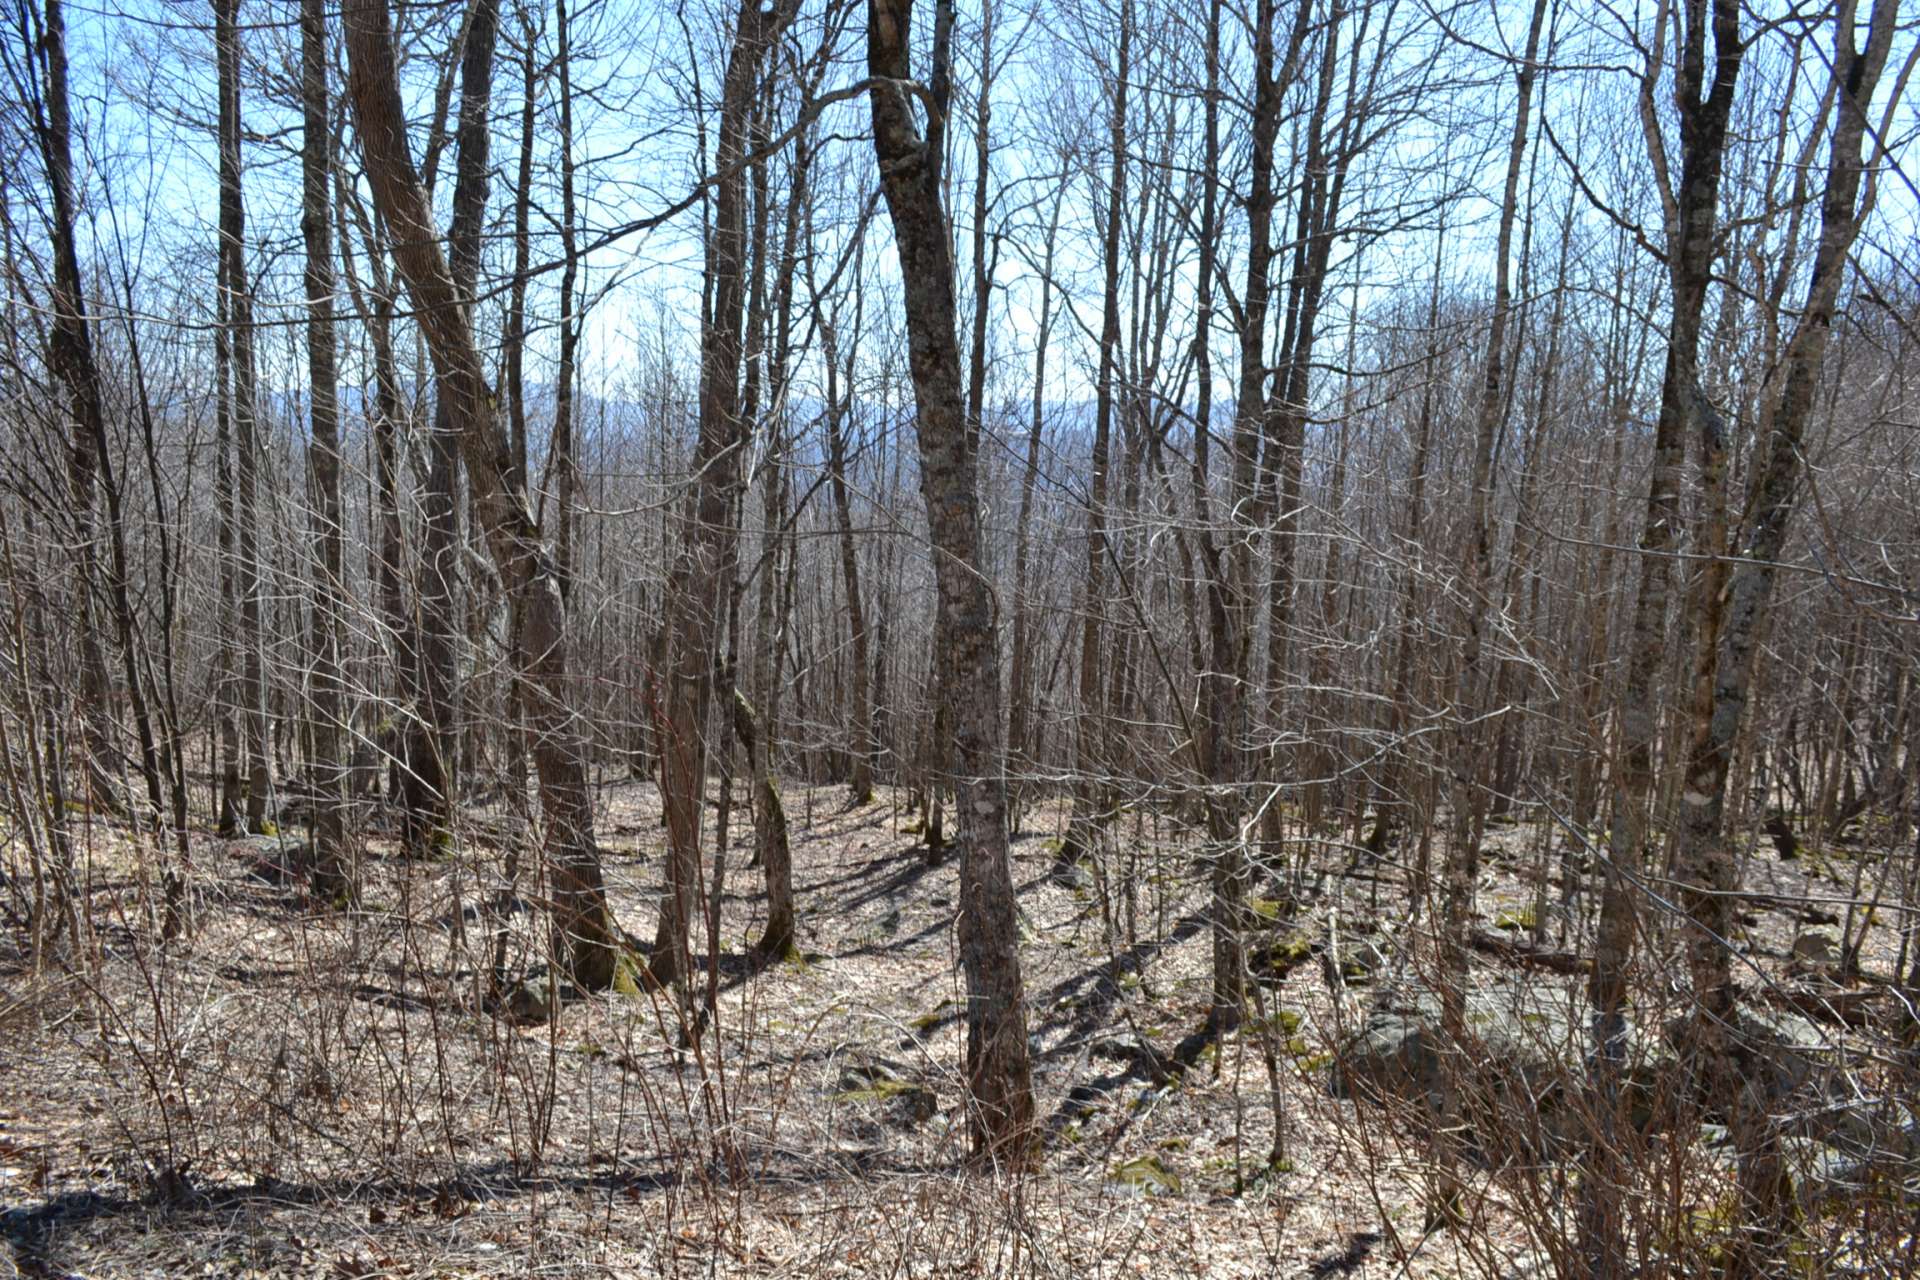 Lot 15 is a 5.87 acre home site offering views with the clearing of trees. *SOLD